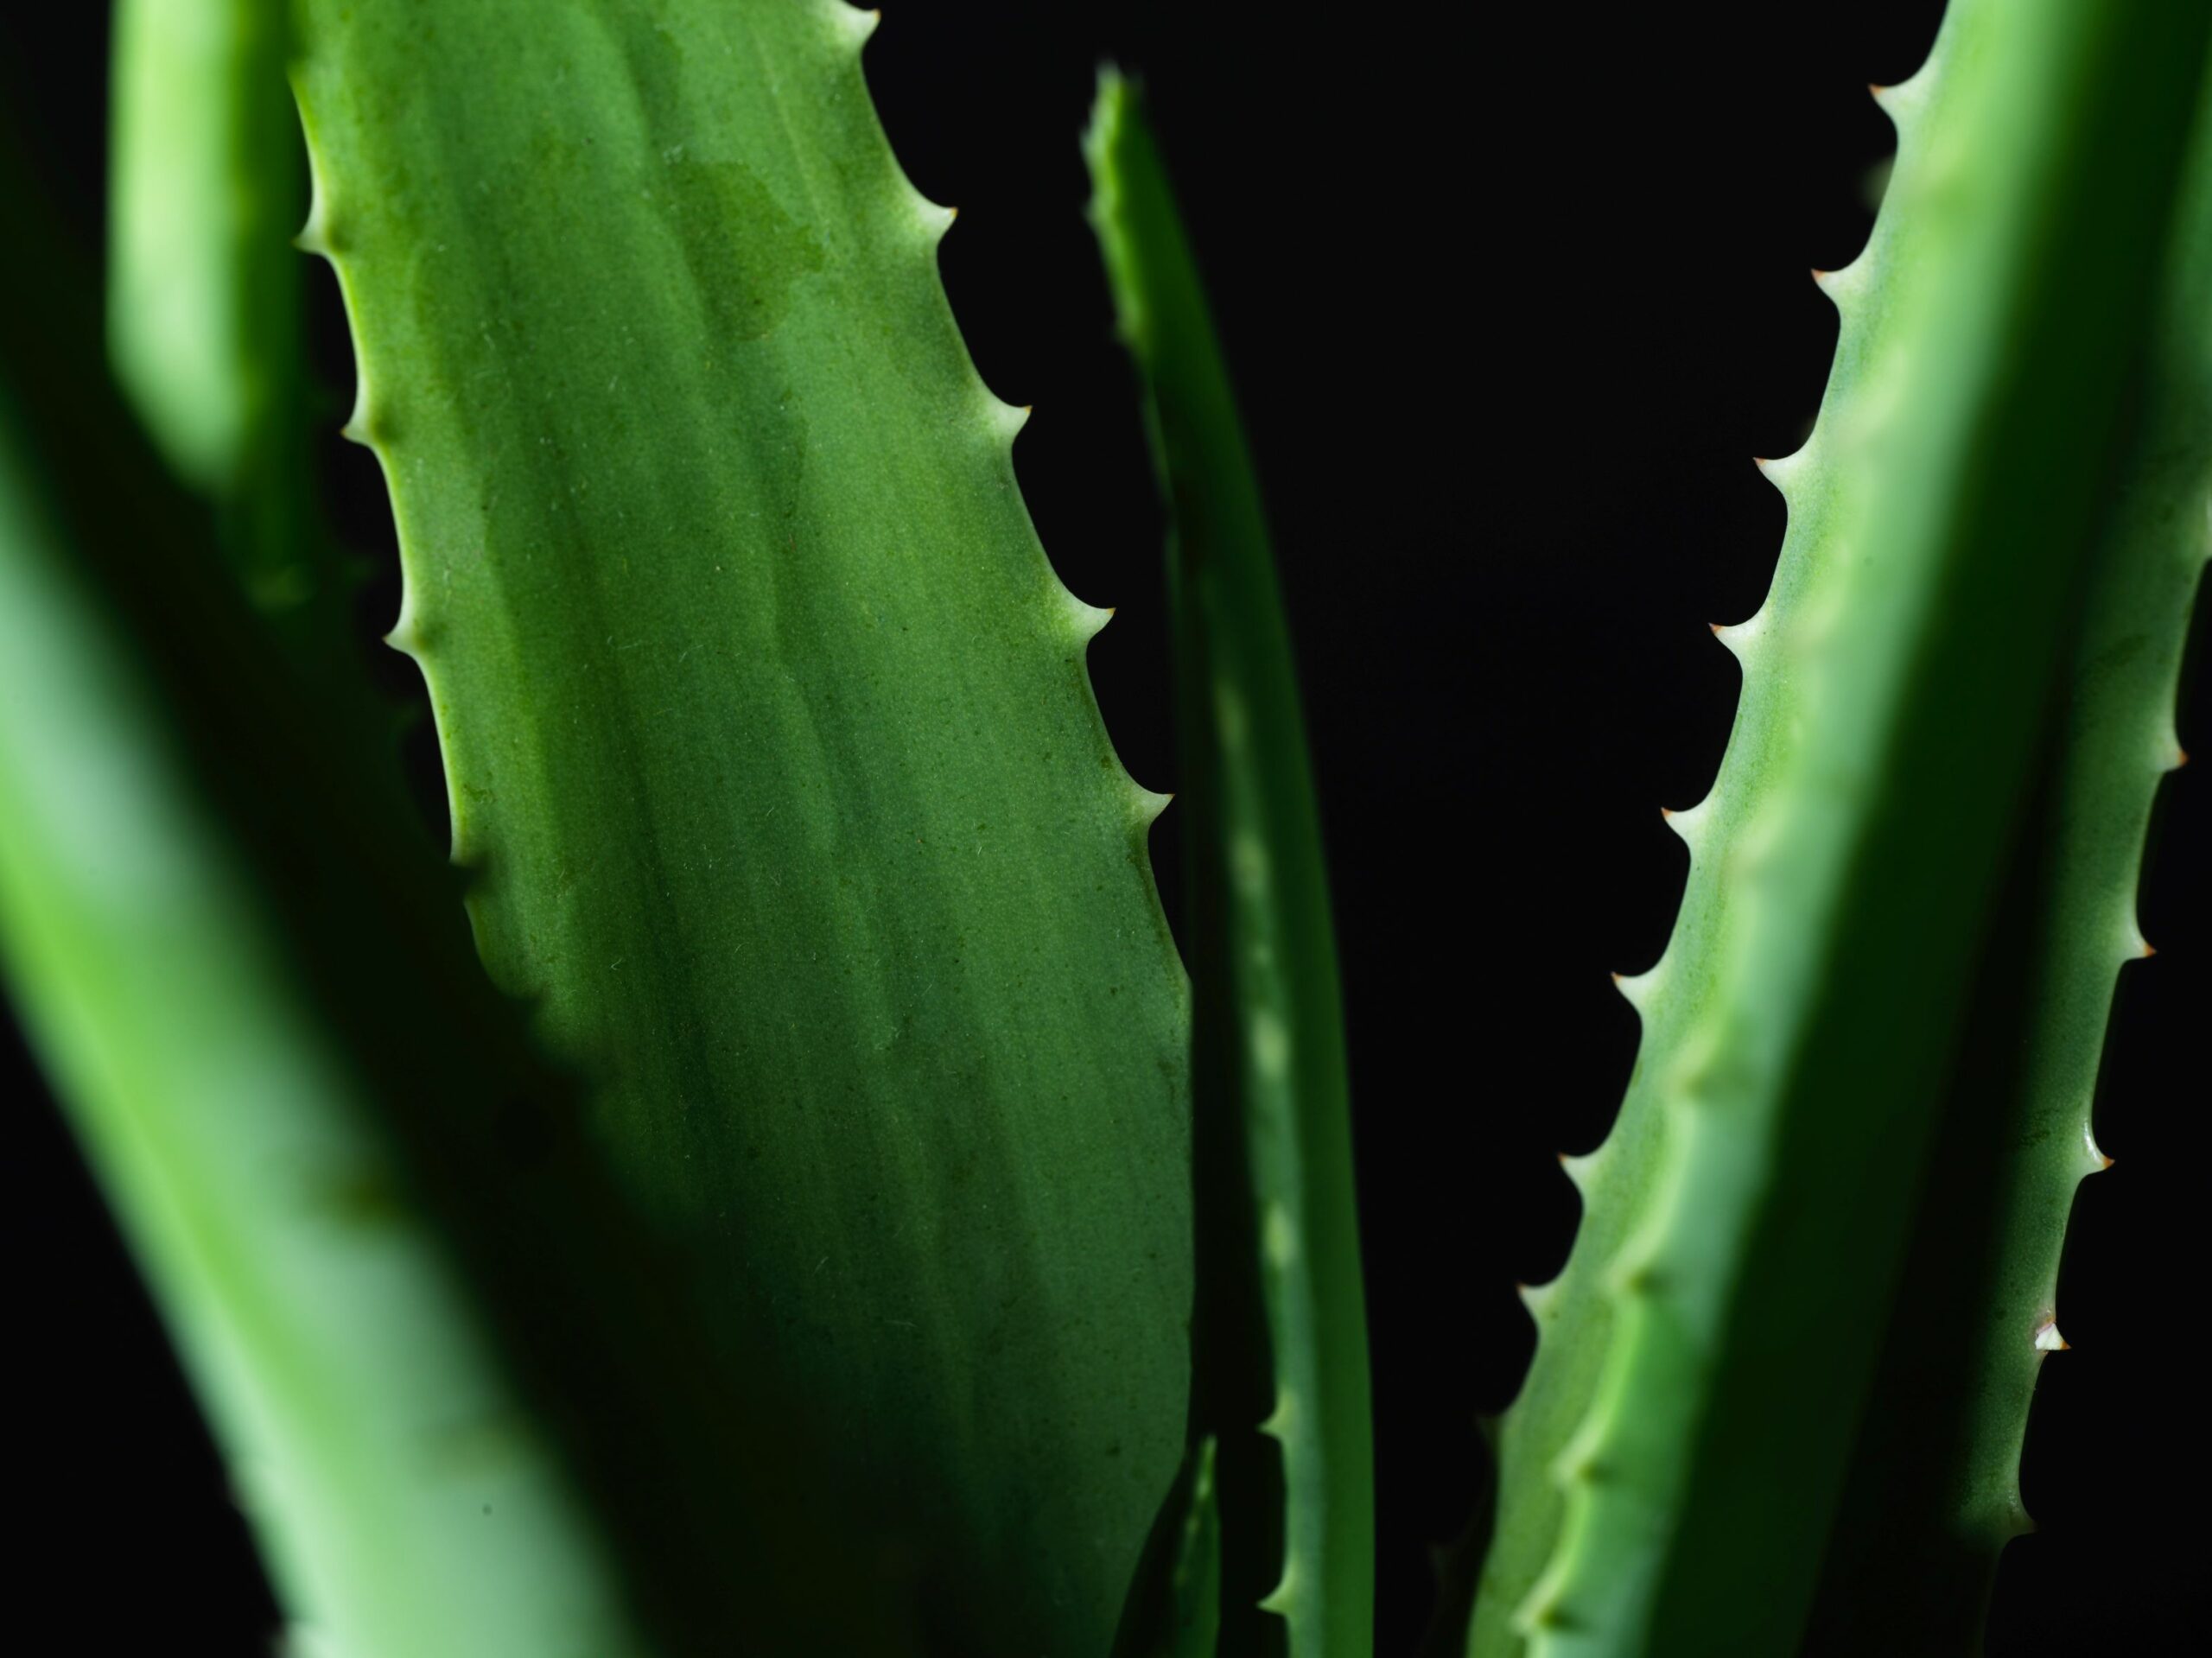 An image of an aloe vera plant for anti-aging skicnare